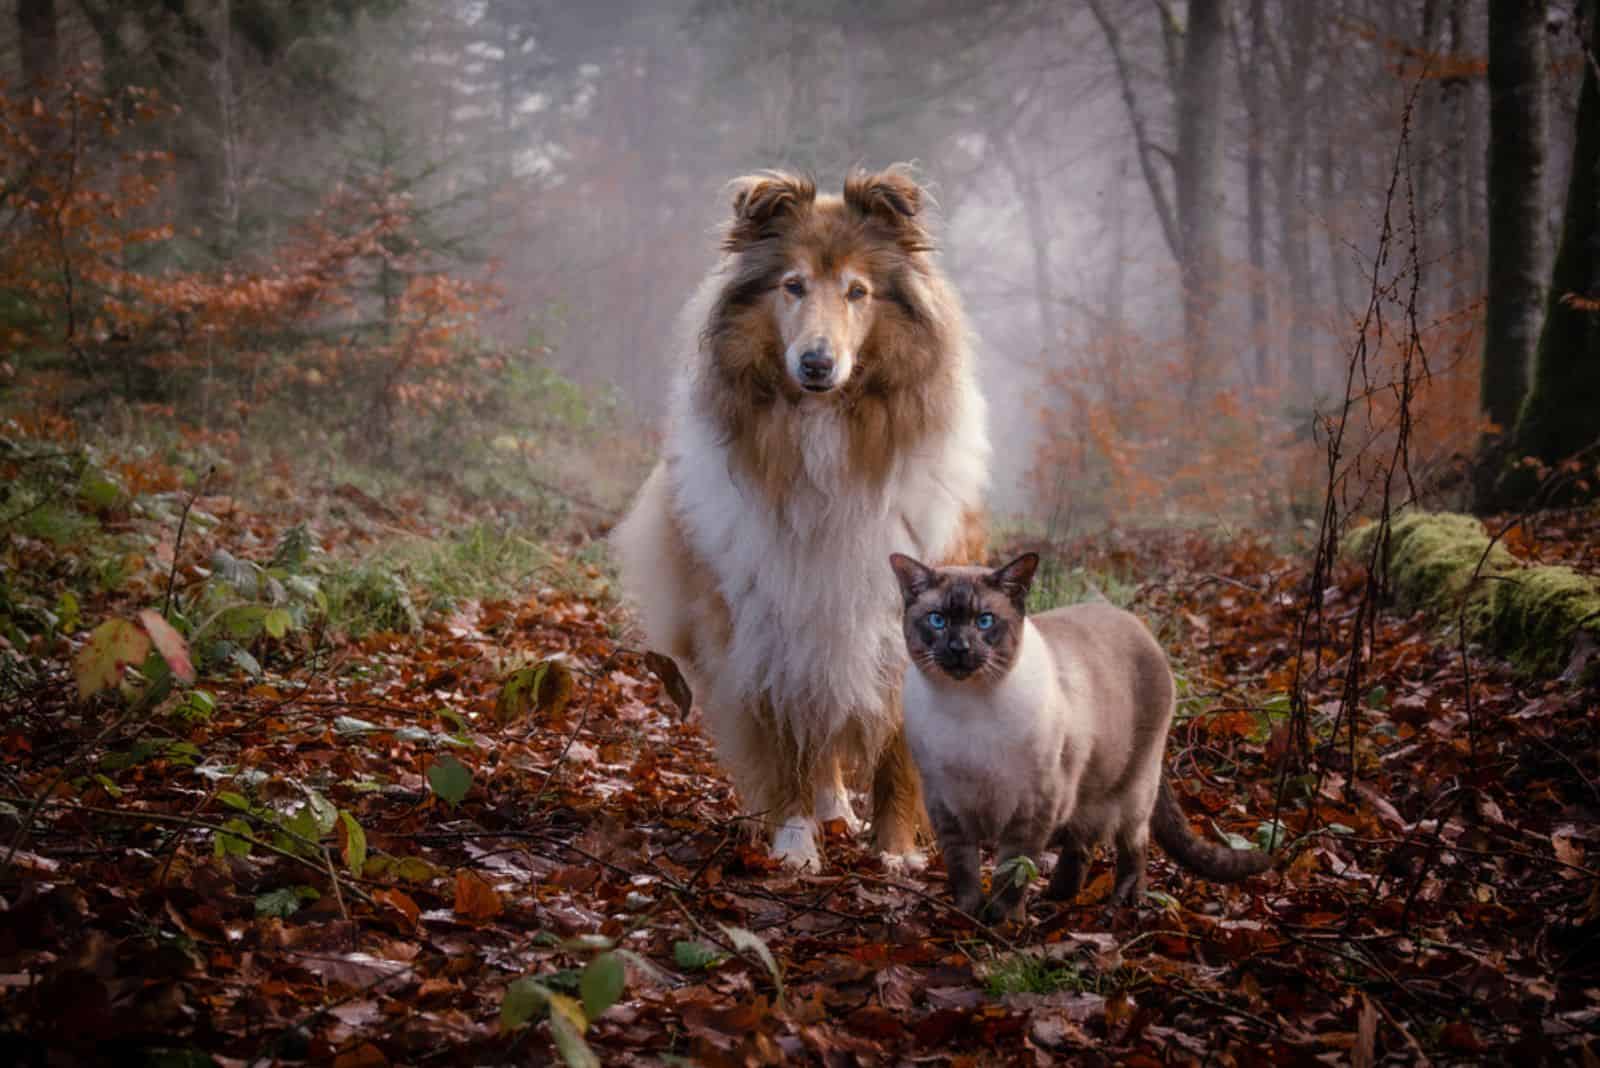 Collie dog with siamese cat in the wood